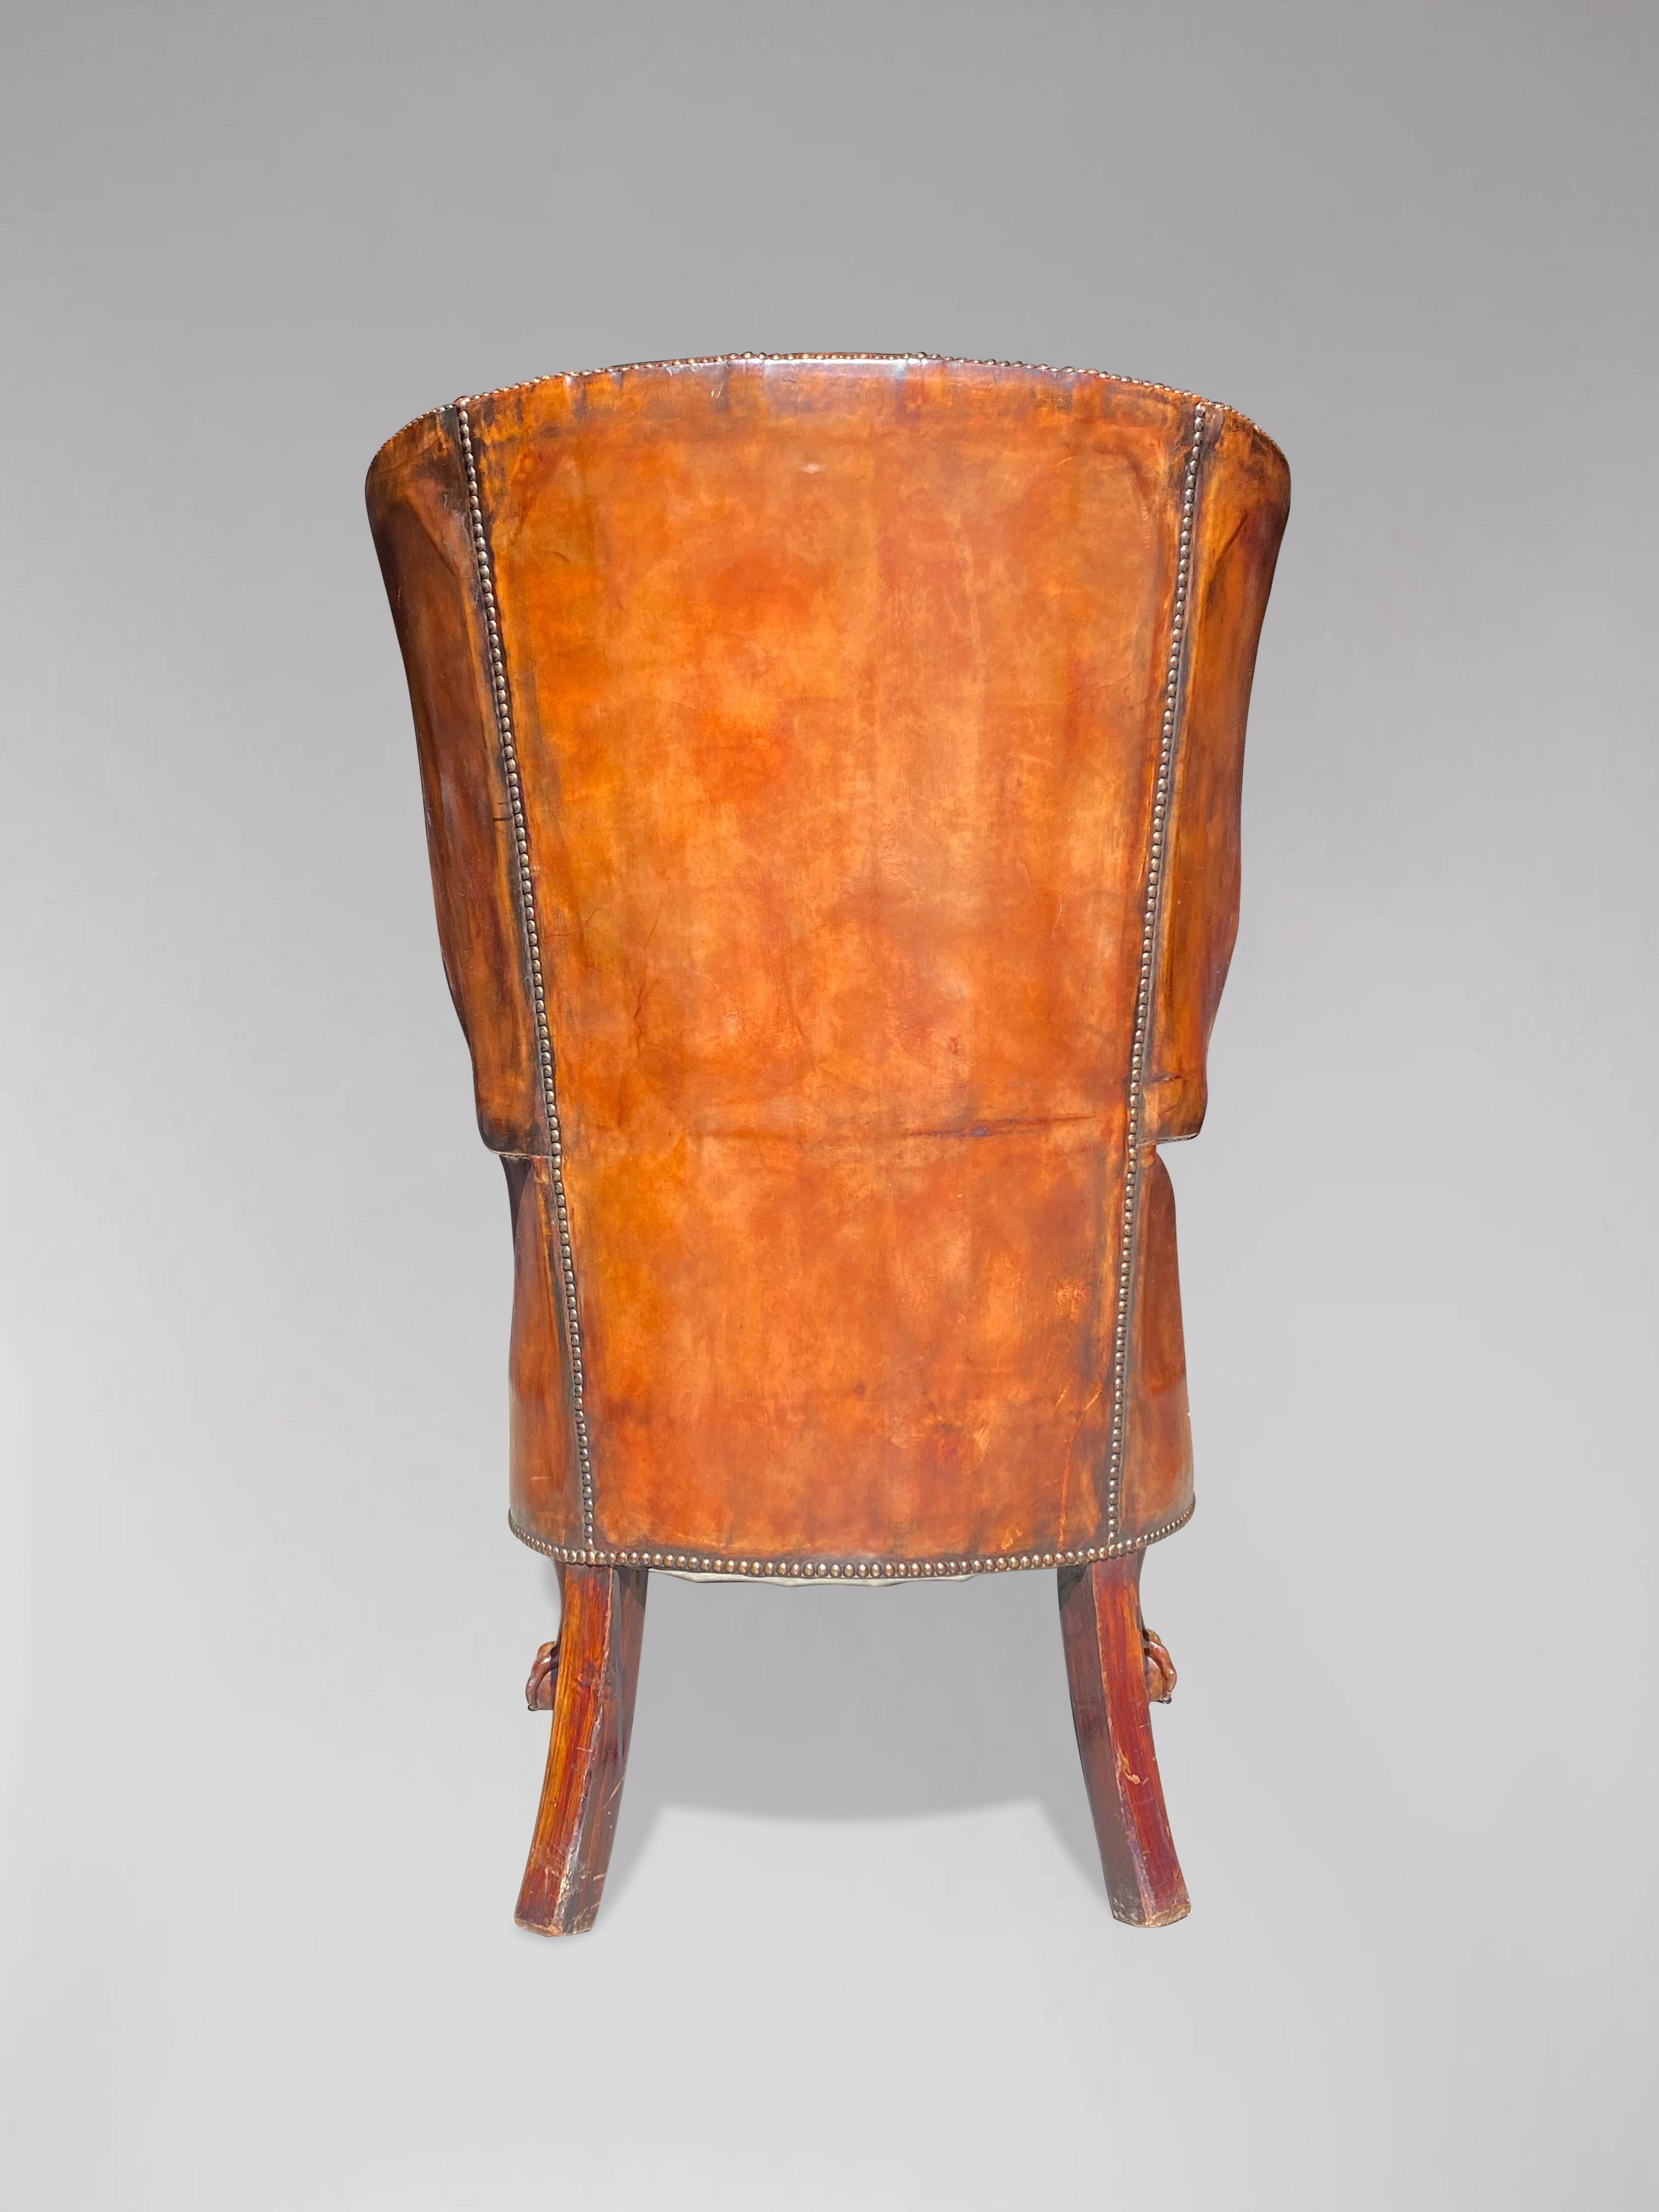 19th Century Brown Leather Barrel Back Armchair In Good Condition In Petworth,West Sussex, GB